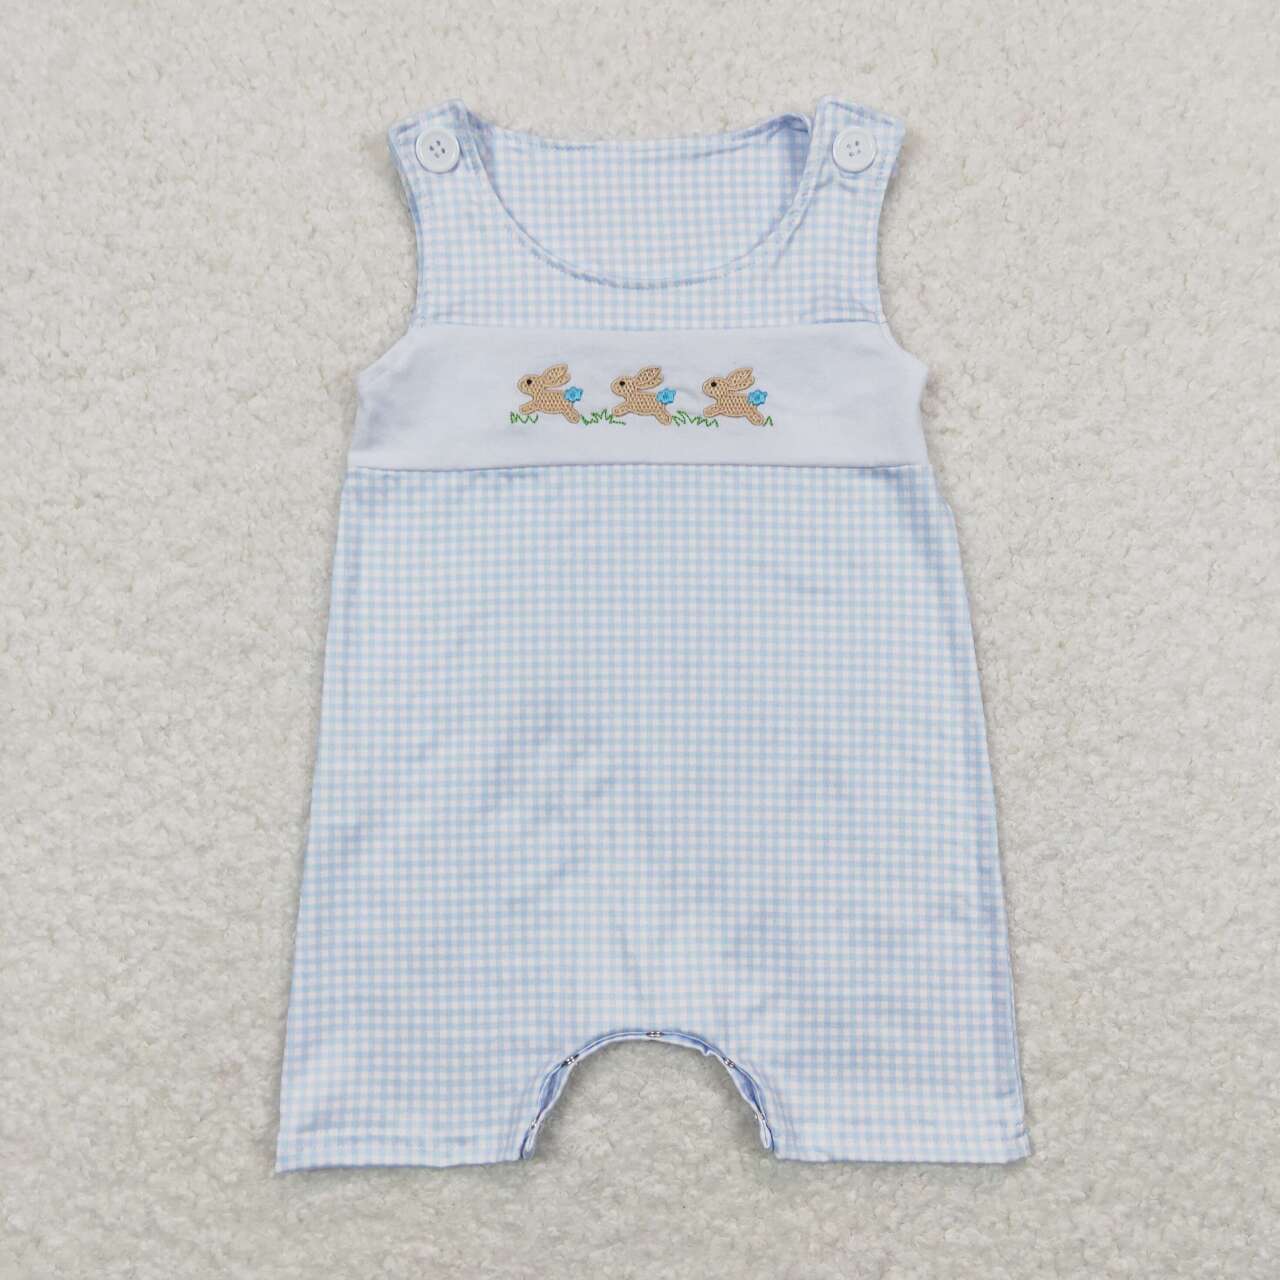 SR0621 Blue Bunny Embroidery Baby Boys Easter Romper